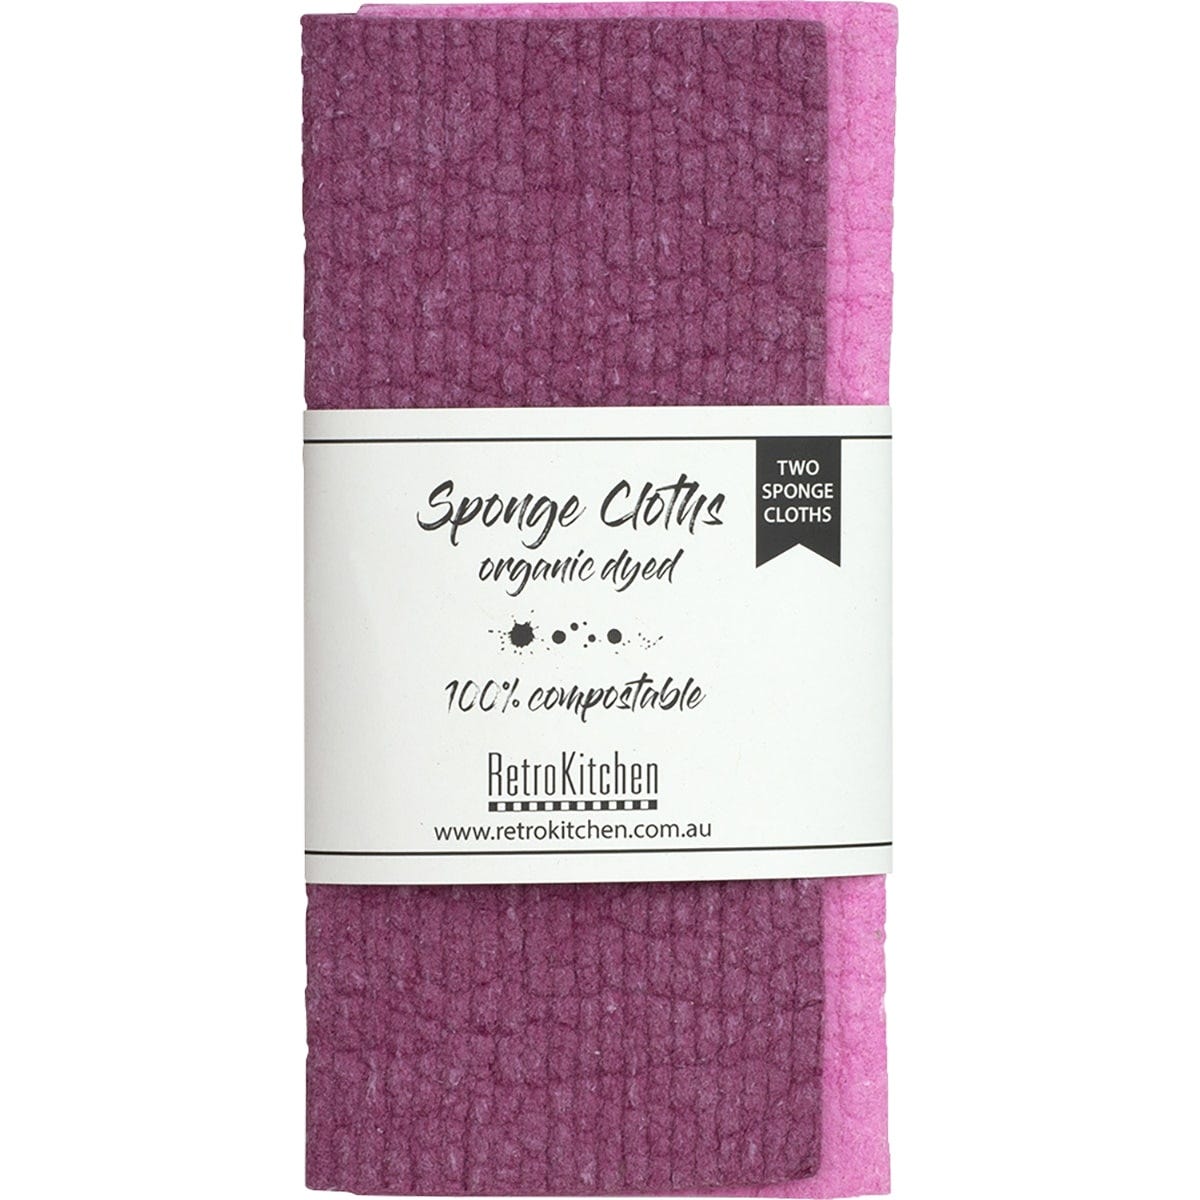 Retrokitchen 100% Compostable Sponge Cloth Organic Dyed Plum 2pk - Dr Earth - Cleaning